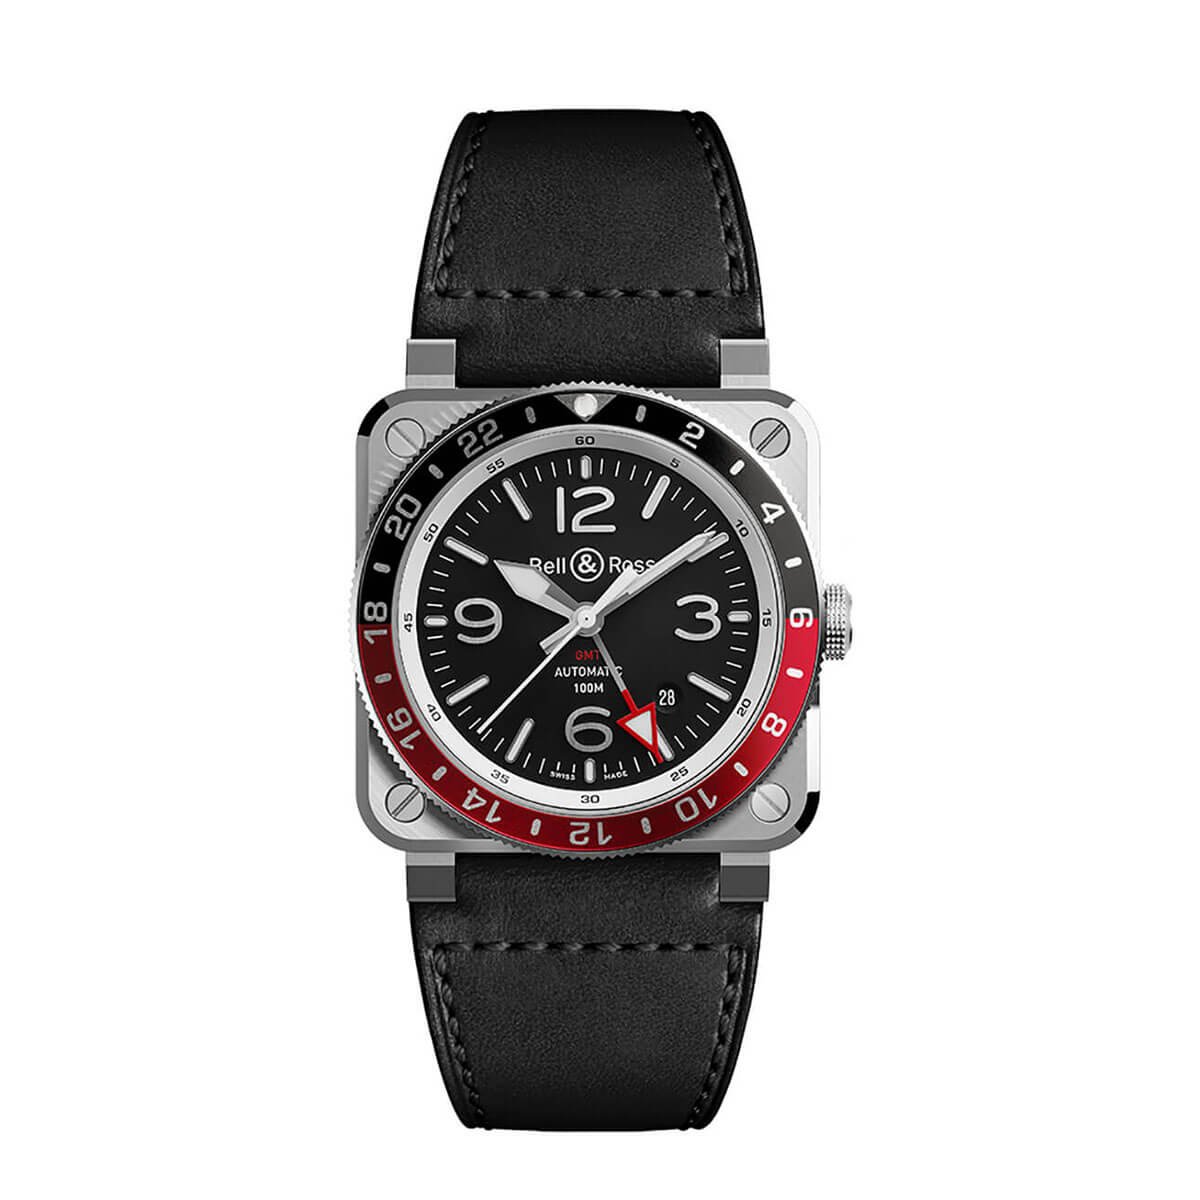 BR 03-93 GMT 42 mm